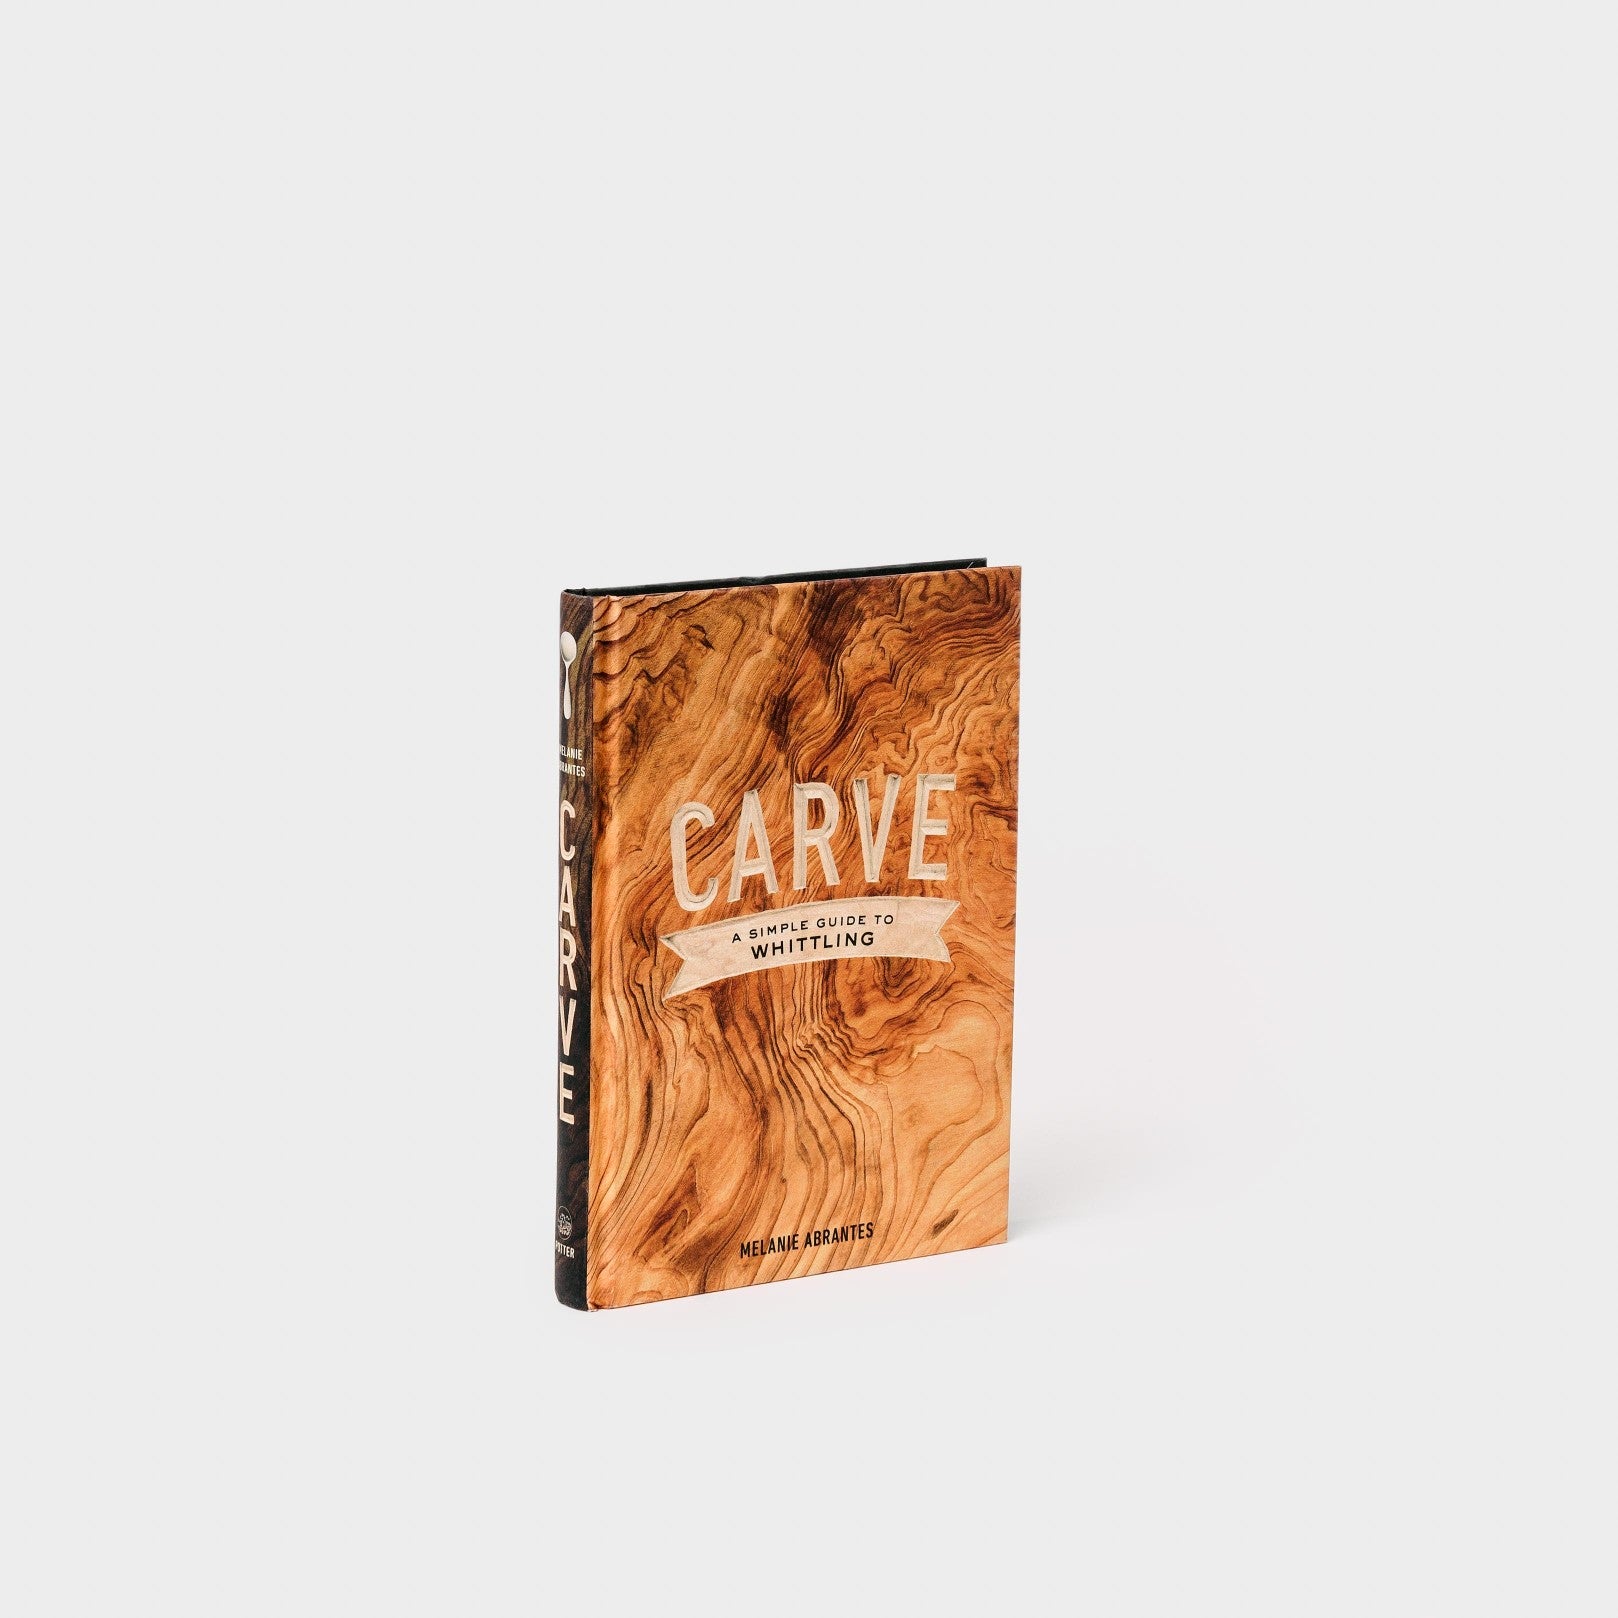 This book "Carve: A Simple Guide to Whittling" is part of the Ultimate Spoon Carving Kit.